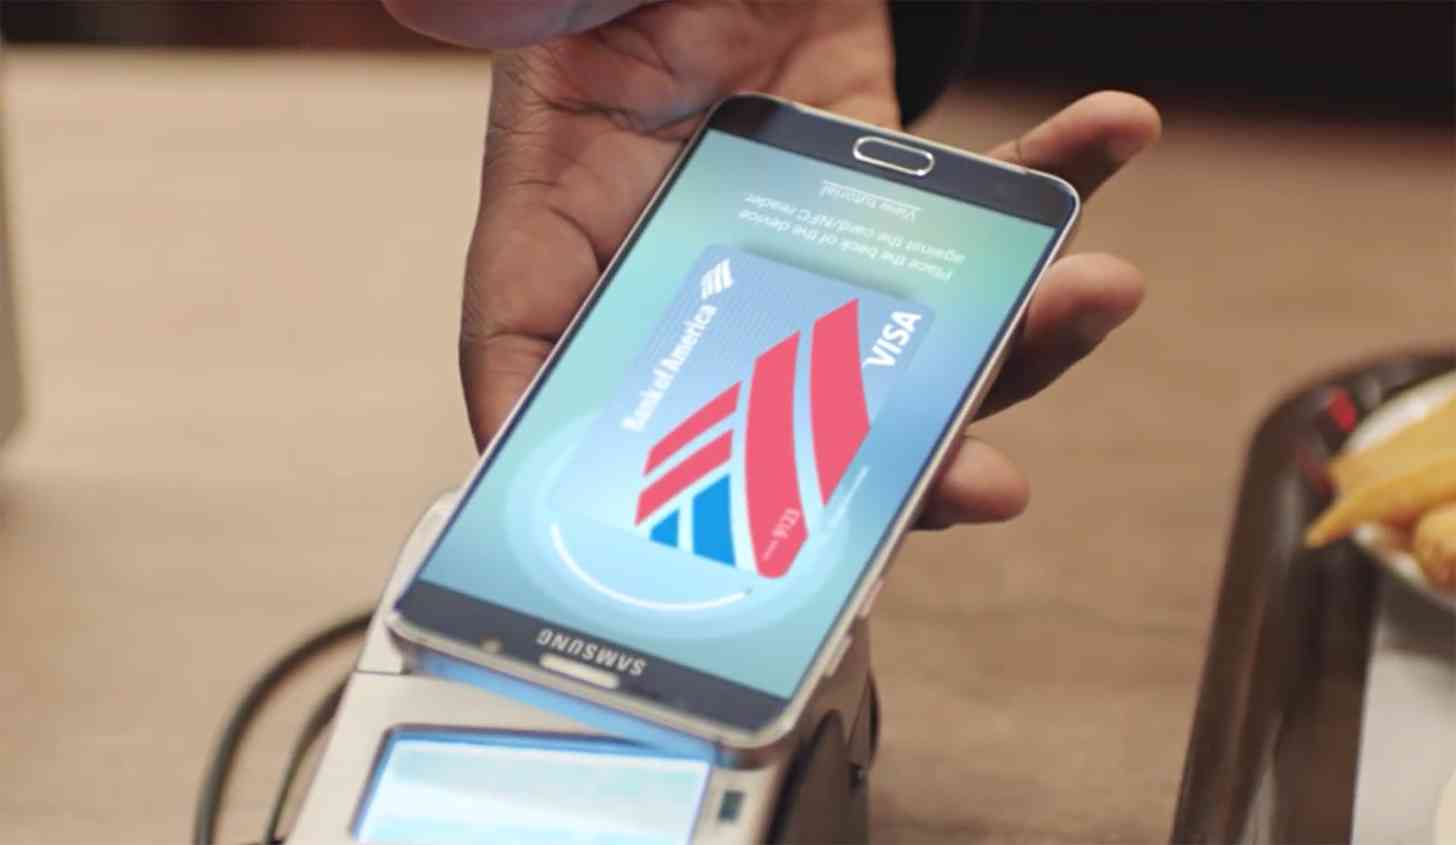 Samsung Pay in use